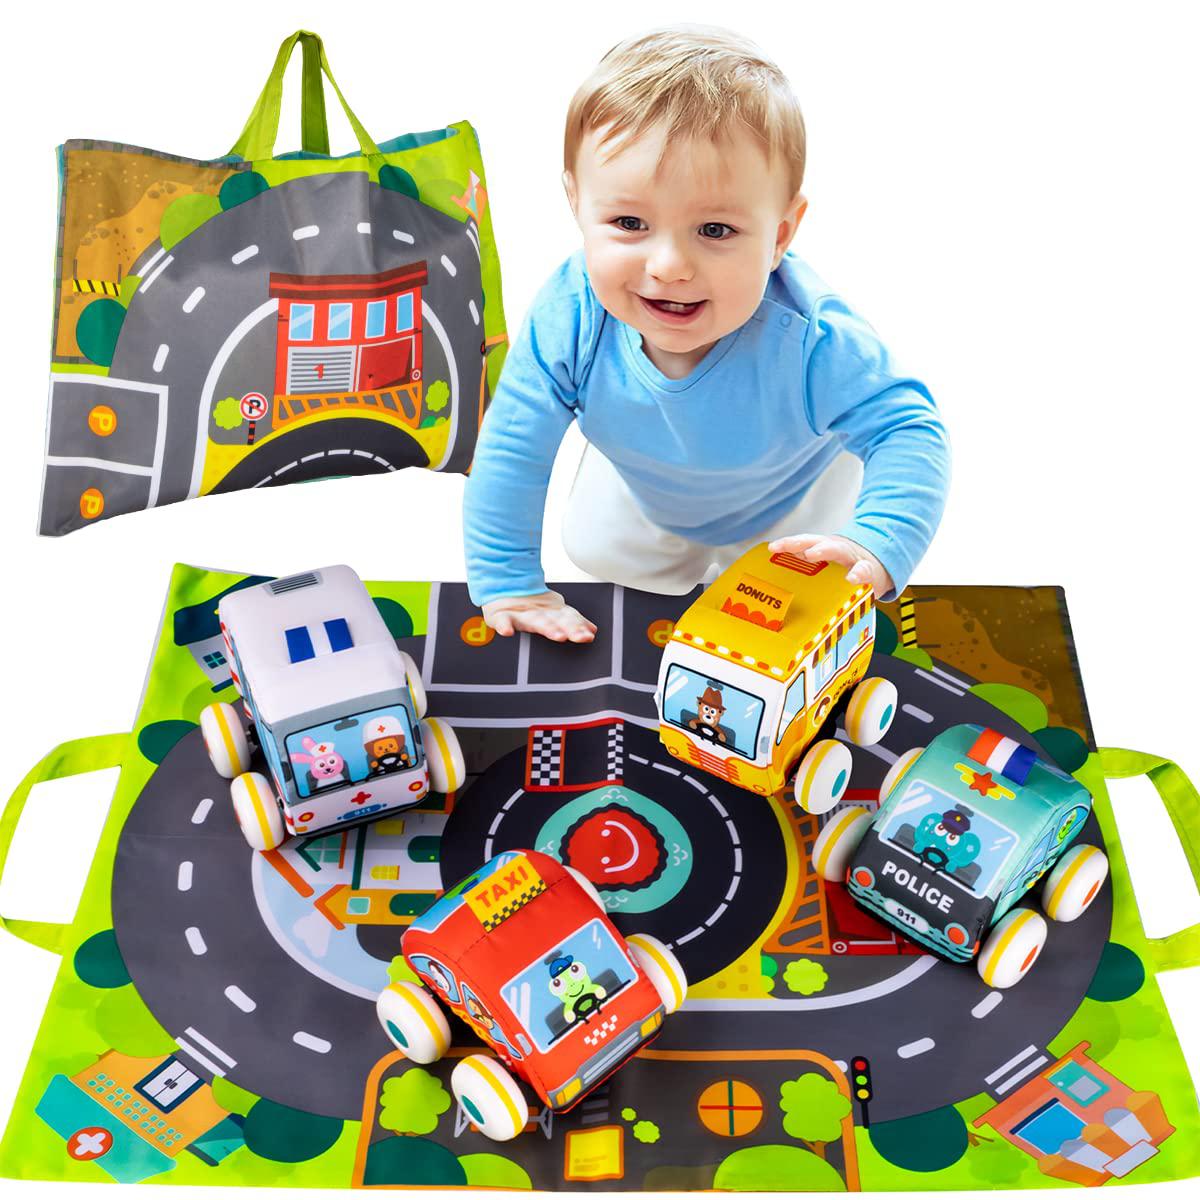 unih pull-back vehicle baby toys of soft plush car set with play mat (storage bag), for toddlers aged 1 2 3 year old gift